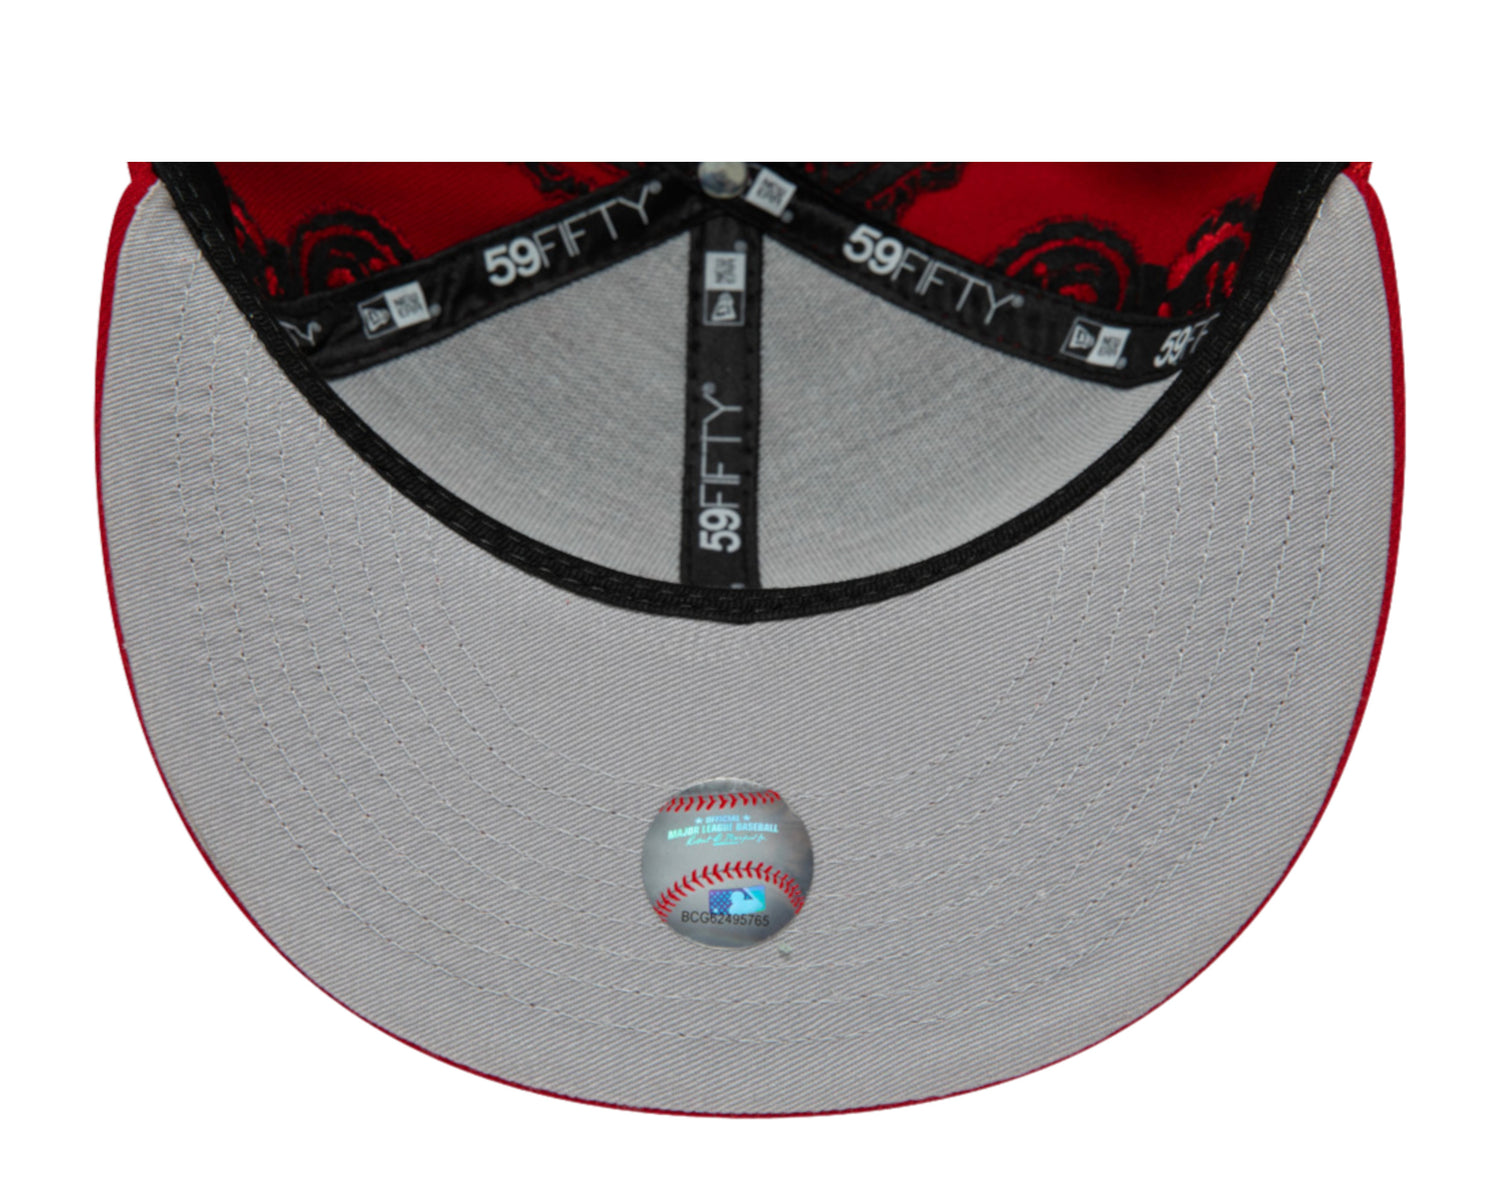 New Era 59Fifty MLB St. Louis Cardinals Swirl Fitted Hat